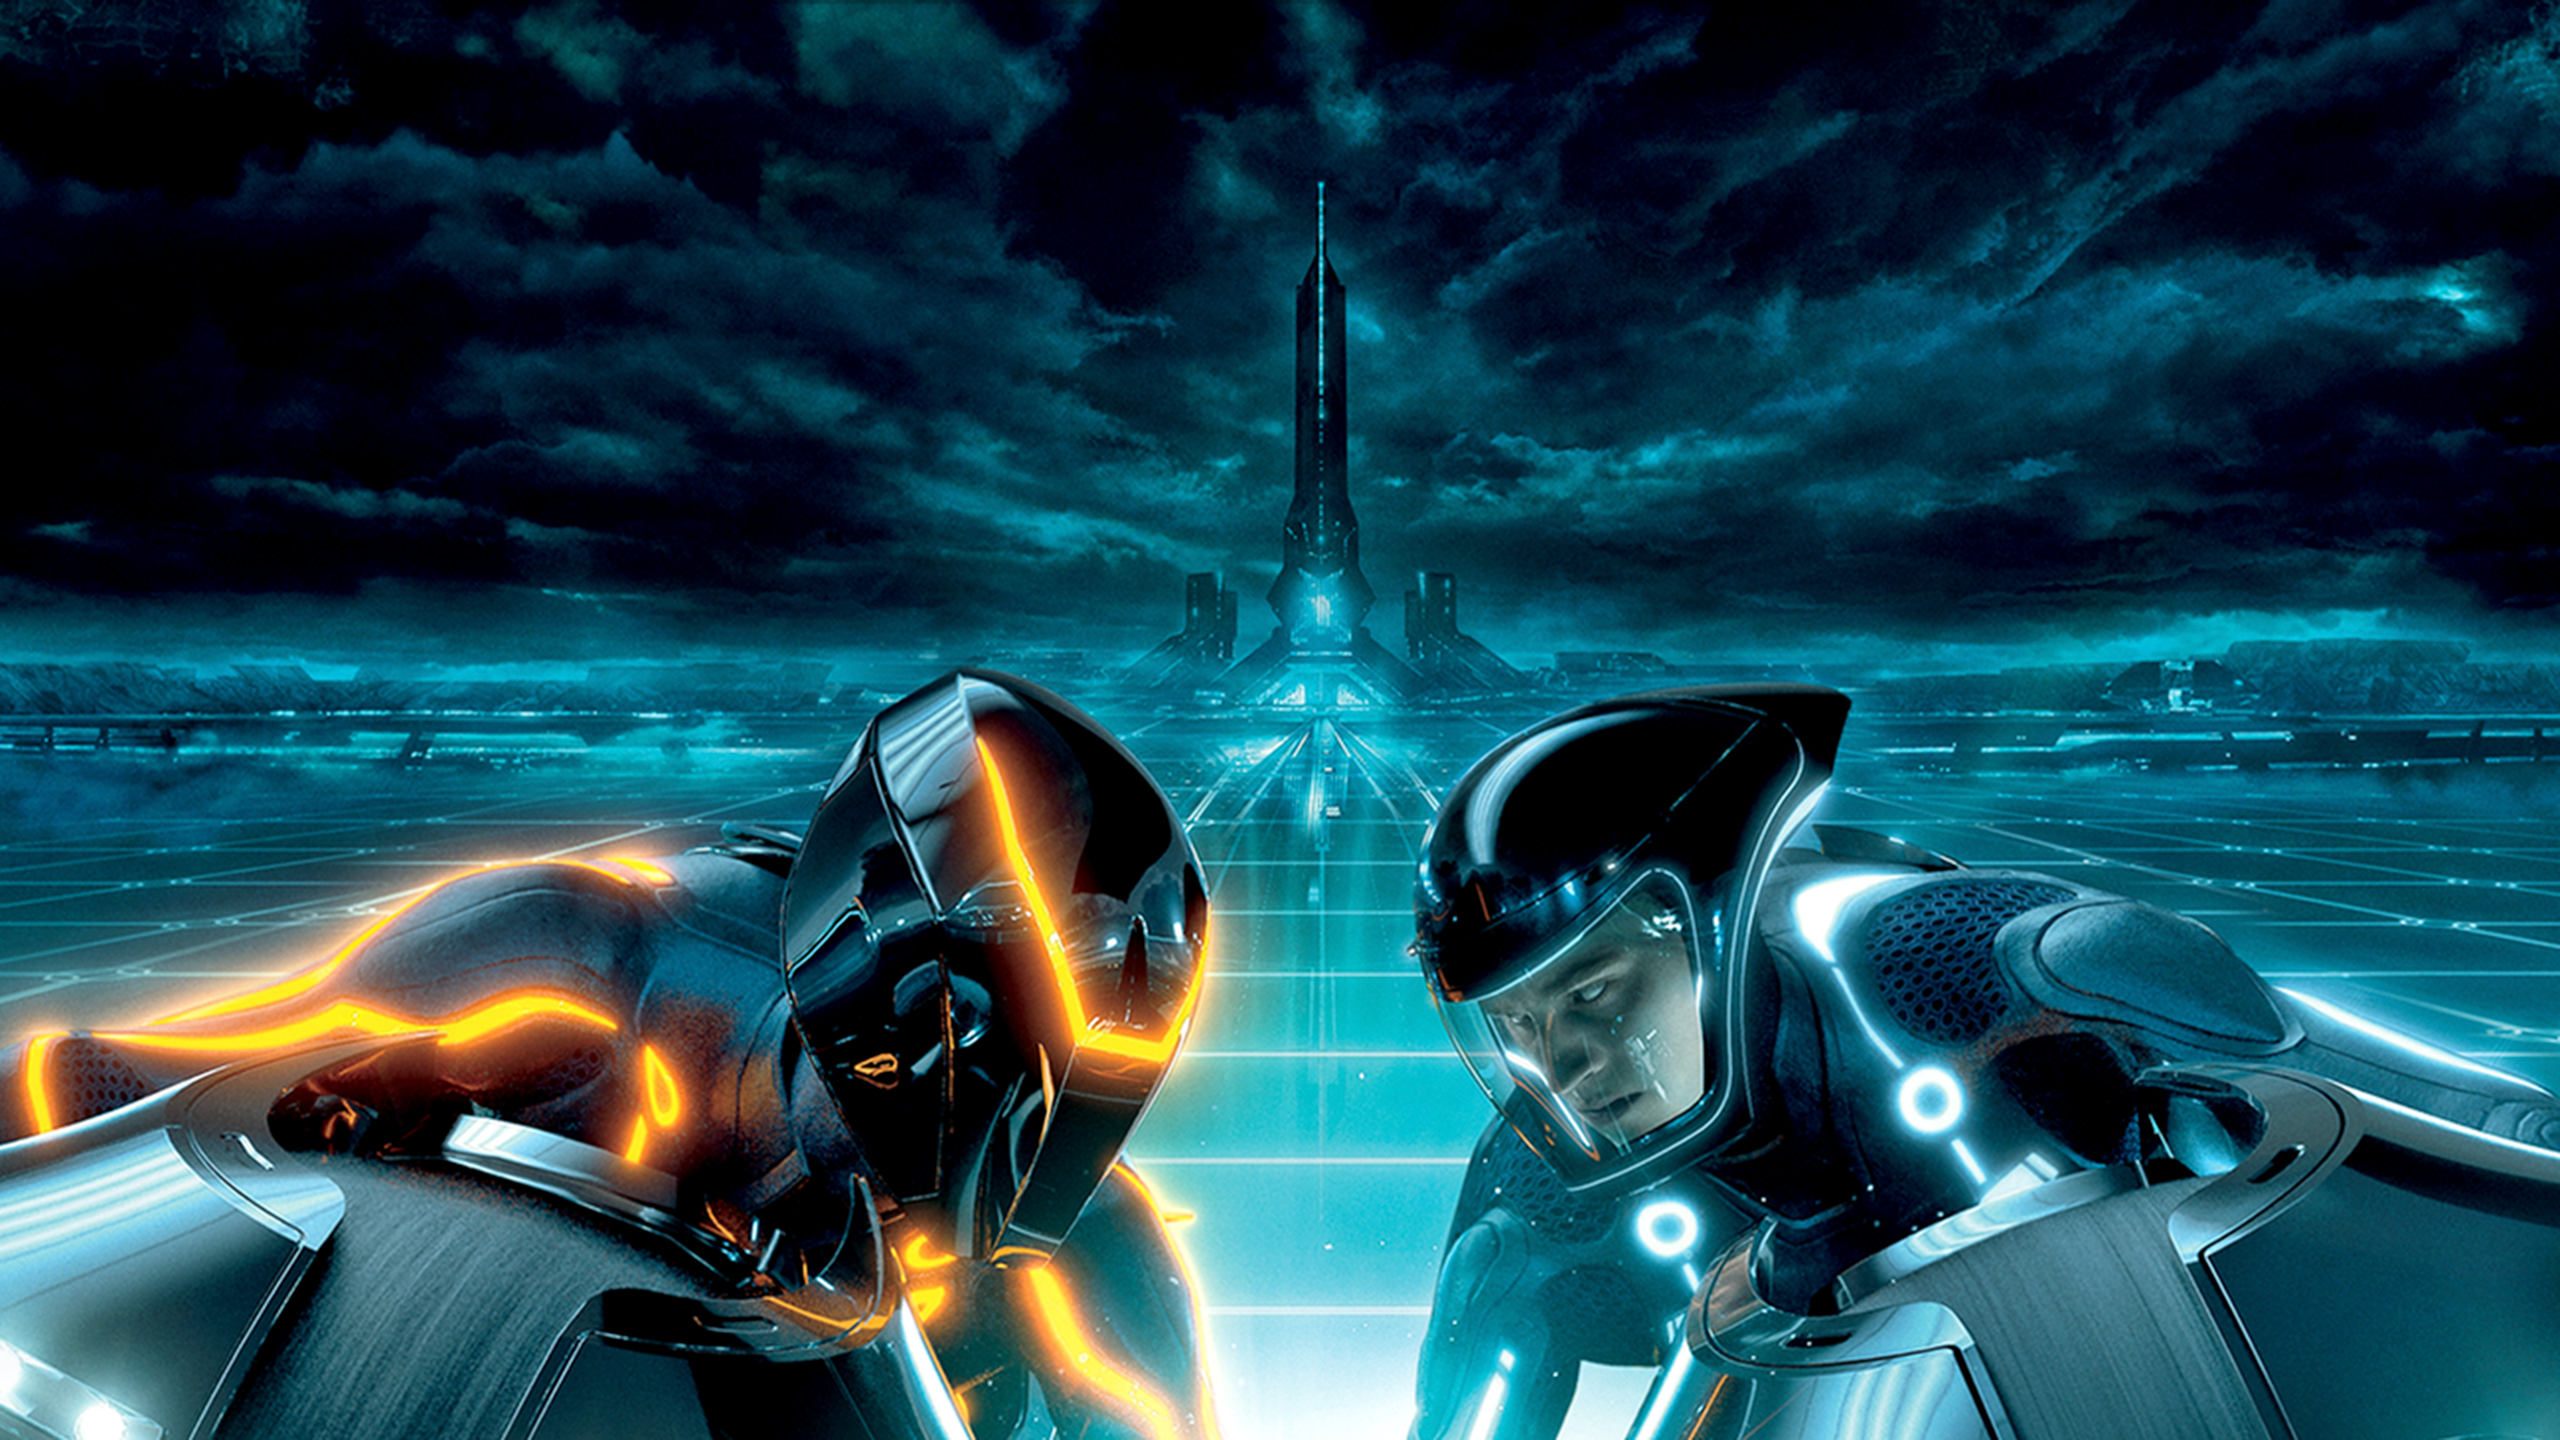 tron legacy full movie library